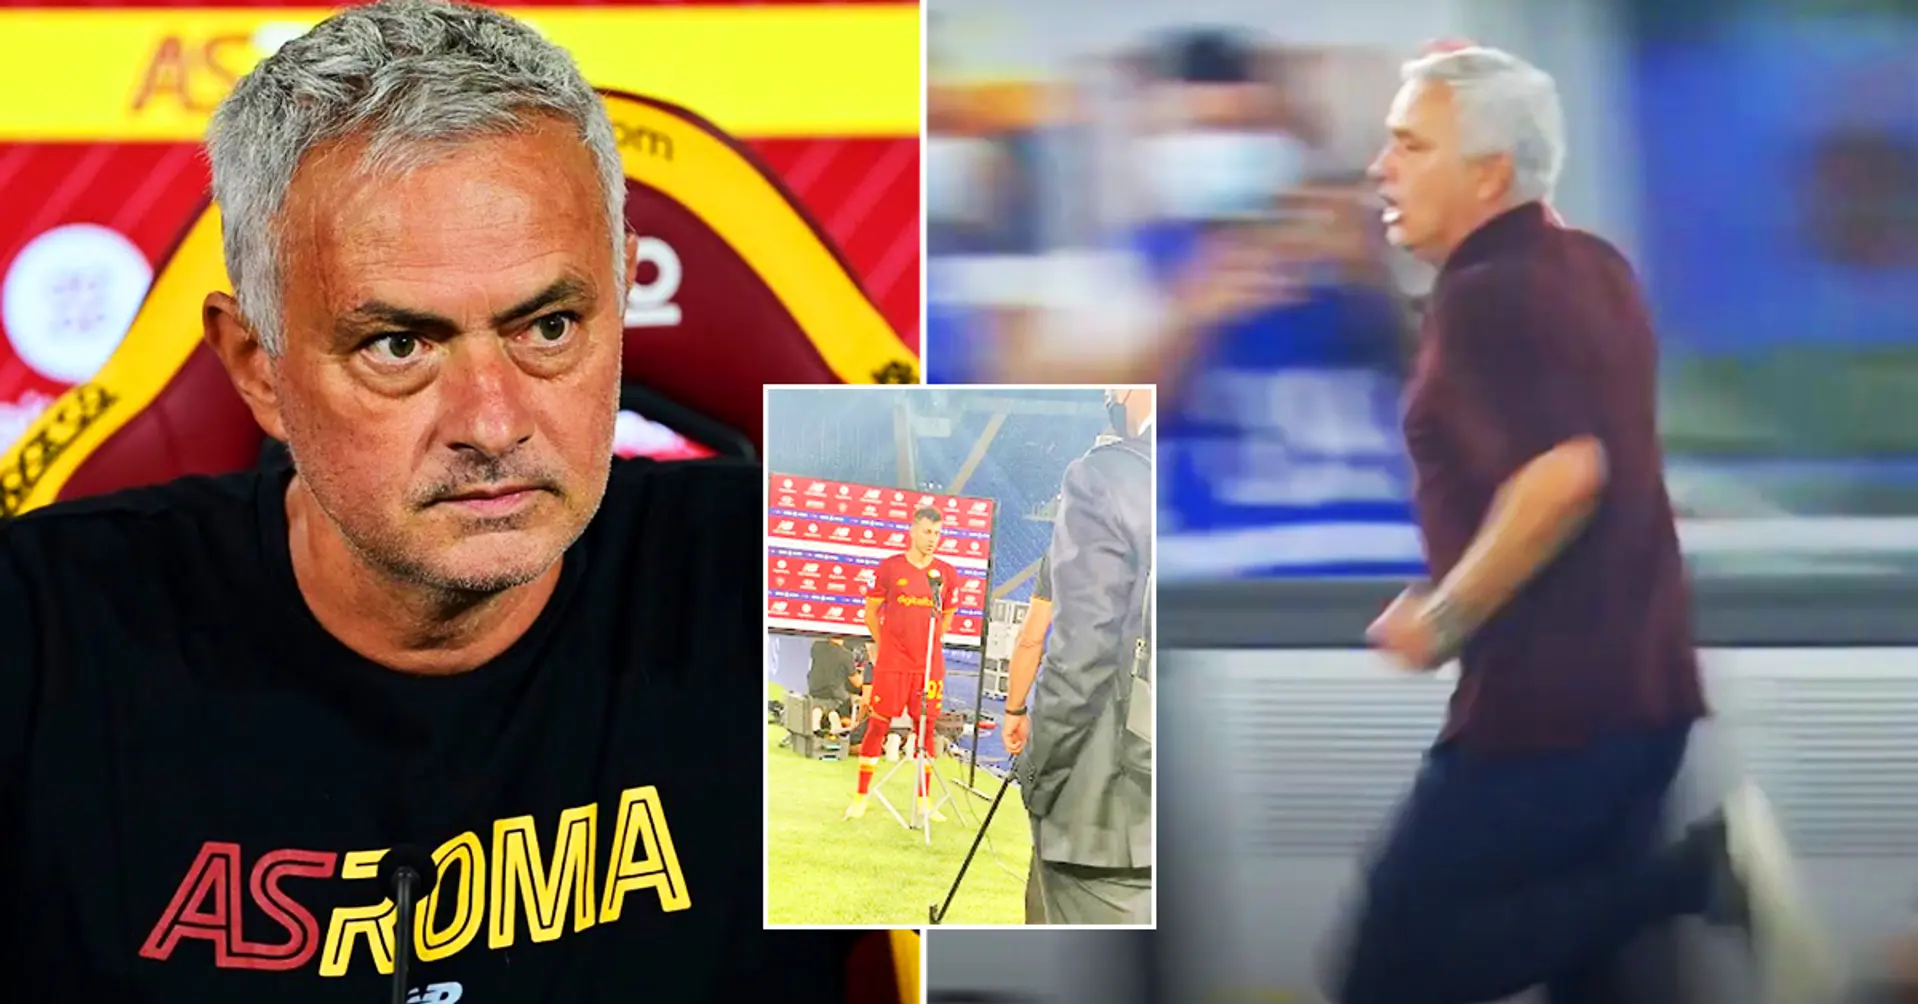 Amazing scenes in Italy: Jose Mourinho runs like Usain Bolt after Roma’s incredible match